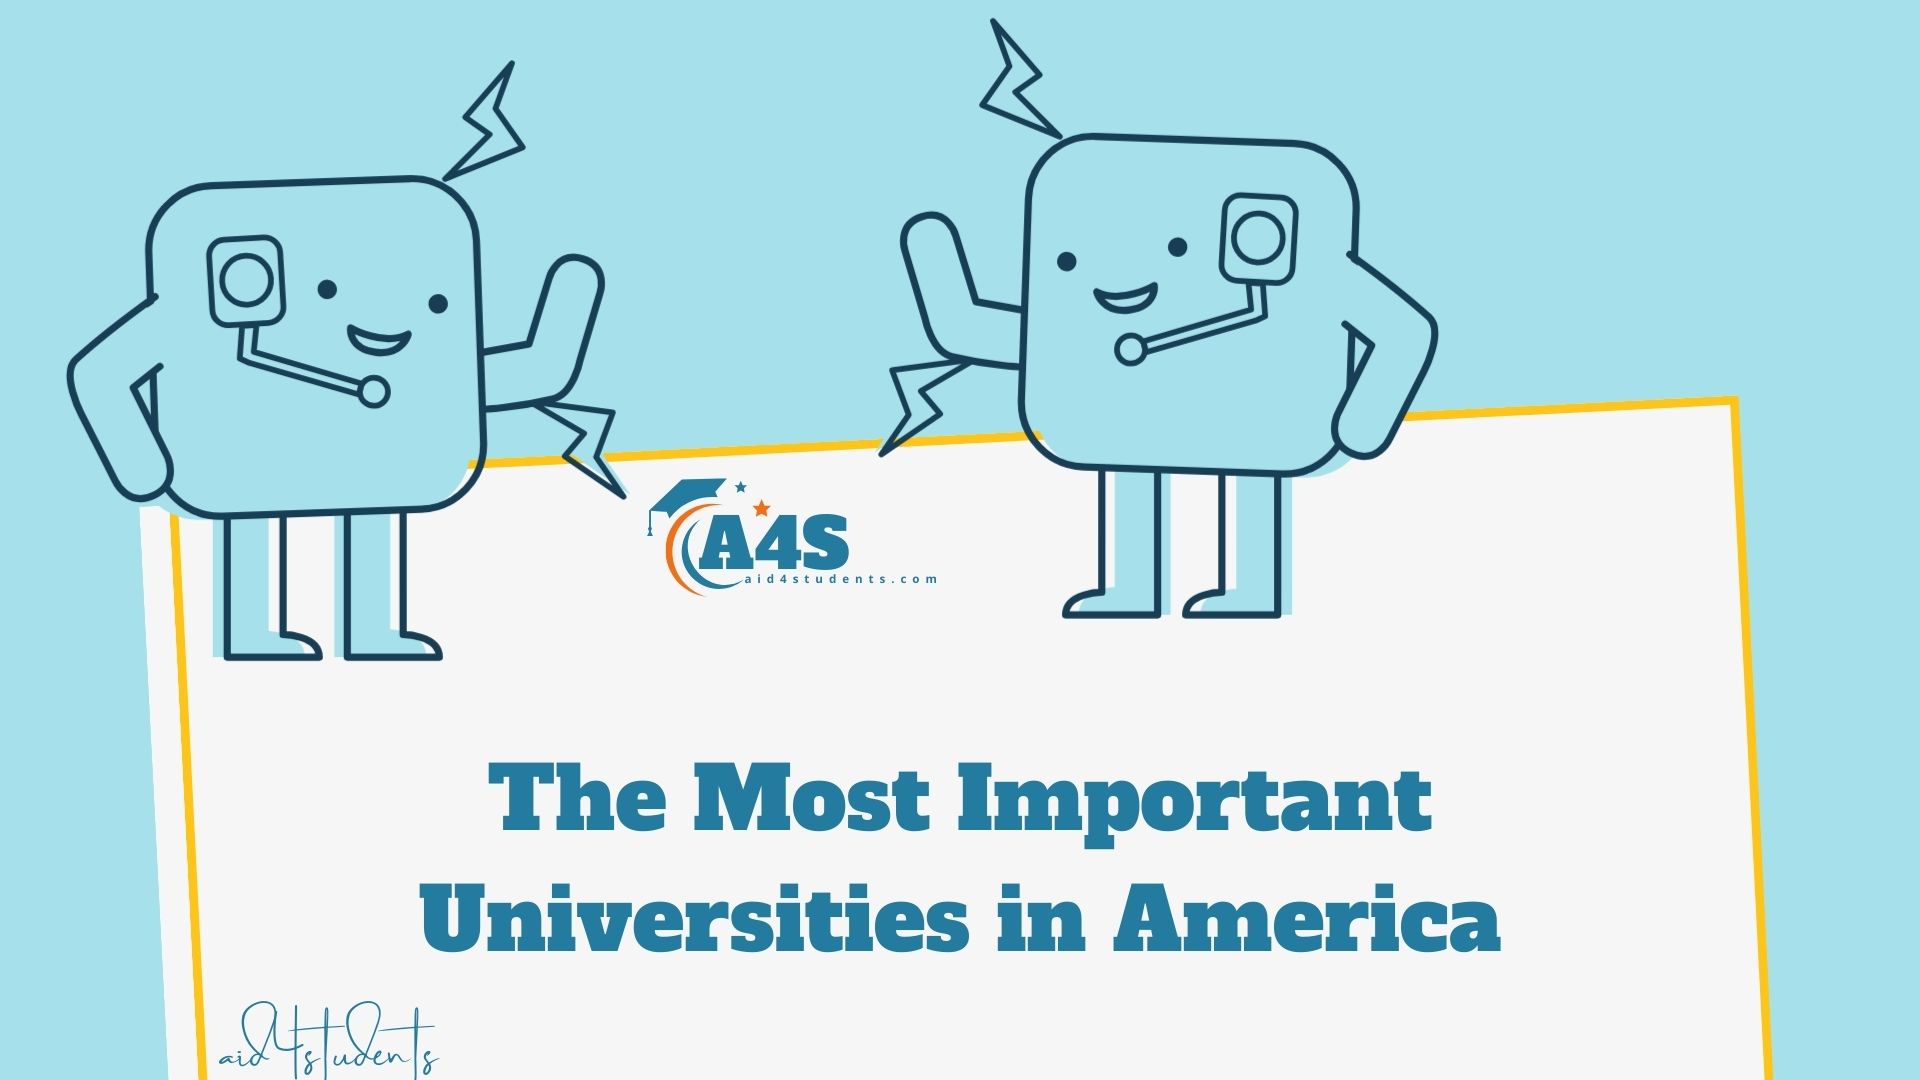 The Most Important Universities in America